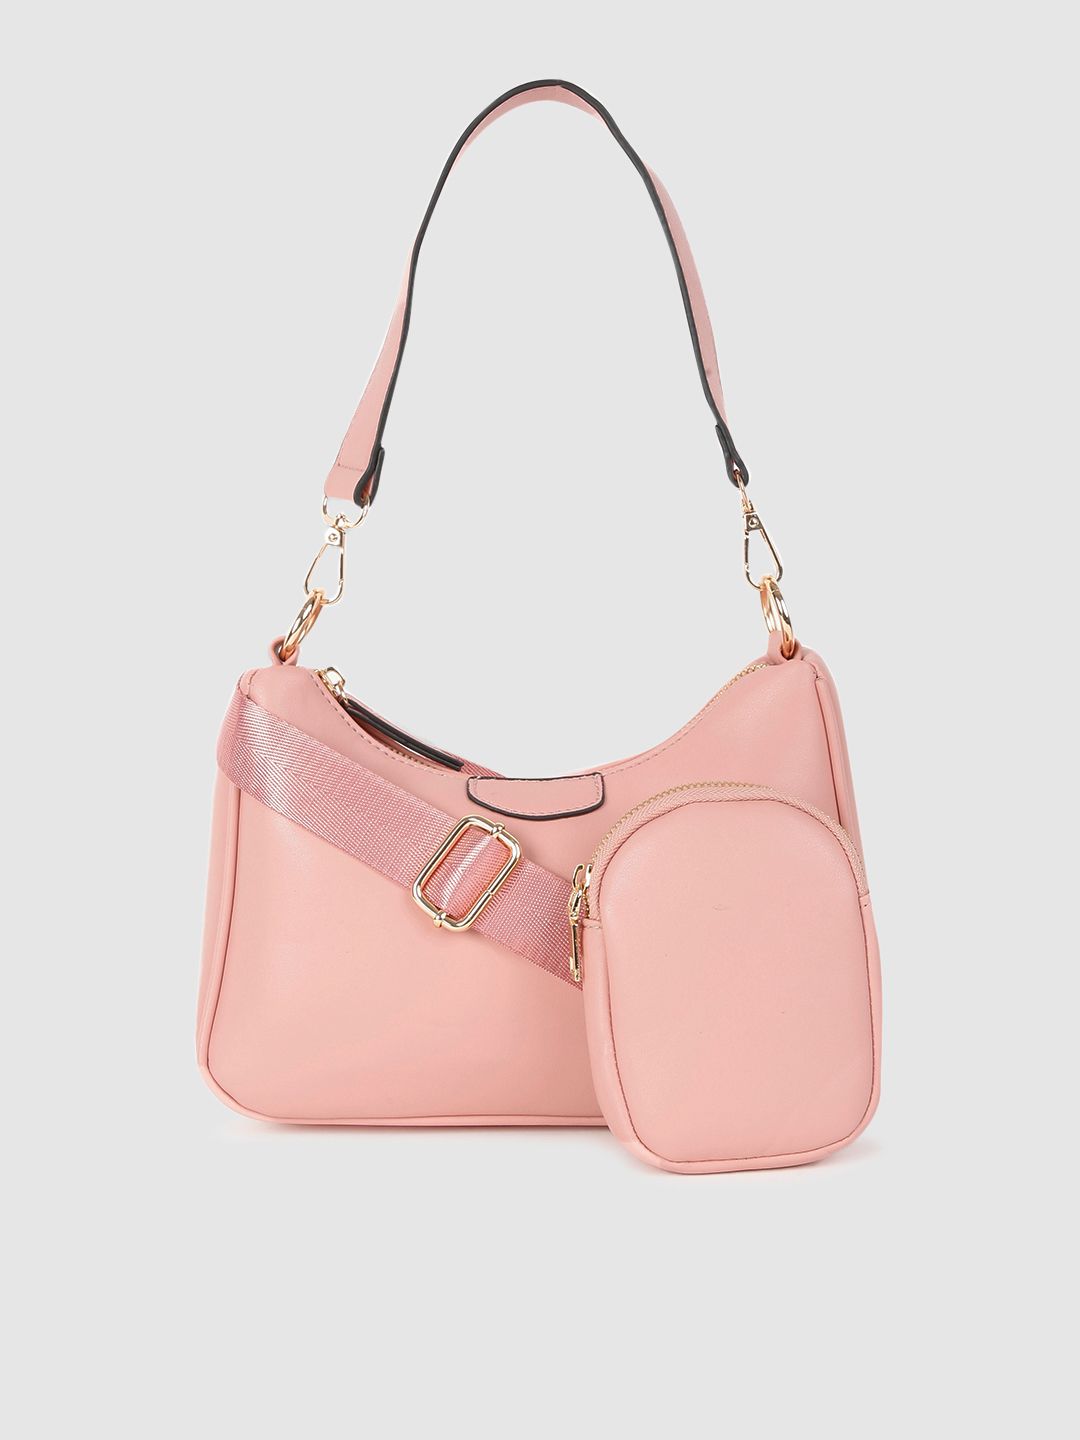 DressBerry Pink Solid PU Regular Structured Hobo Bag Price in India